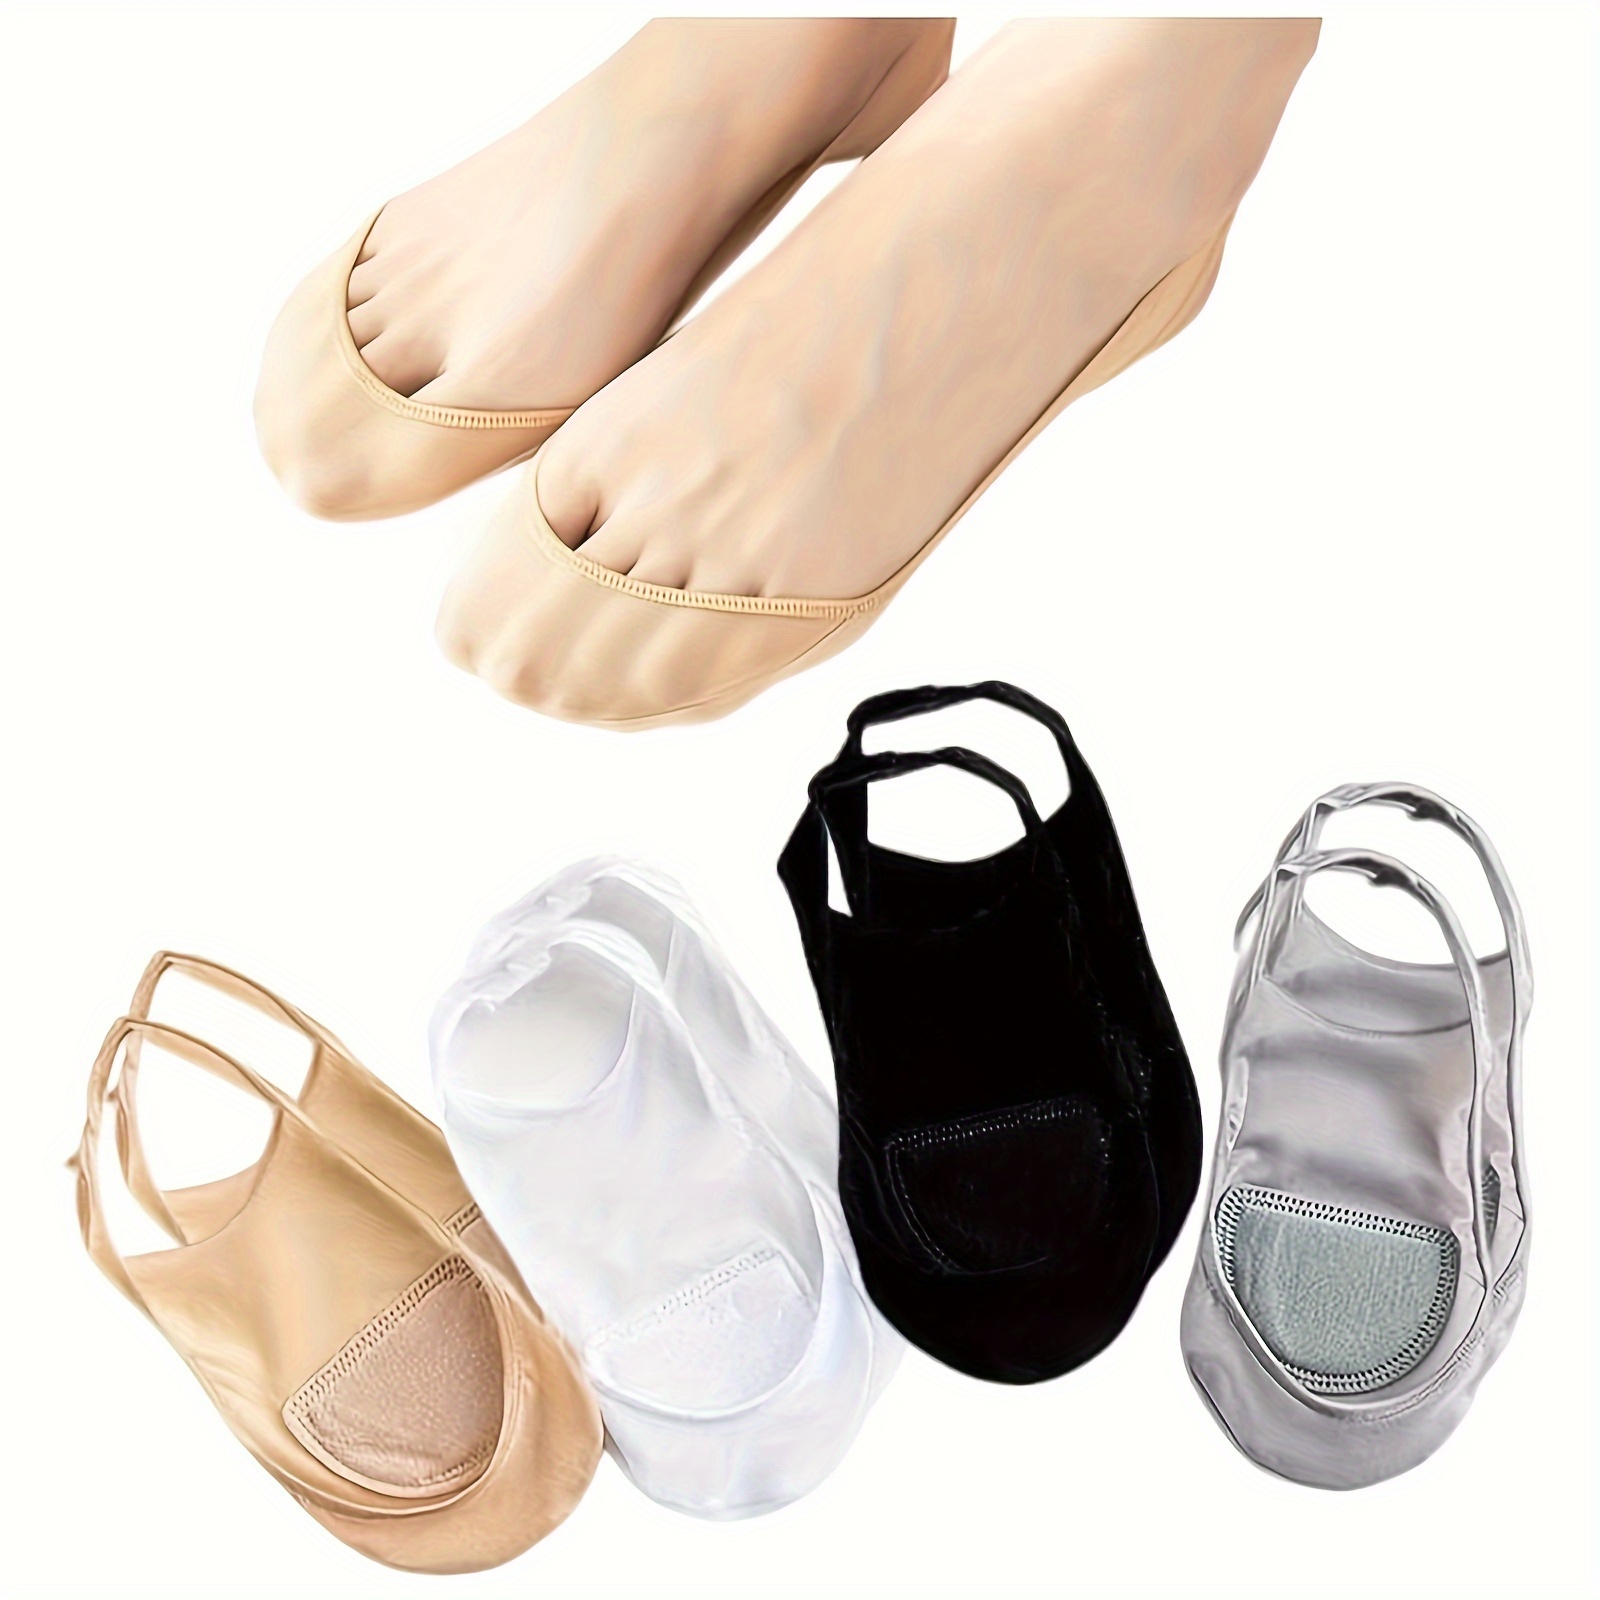 

4 Pairs No Show Liner Socks, Non-slip Low Cut Invisible Socks, Women's Stockings & Hosiery